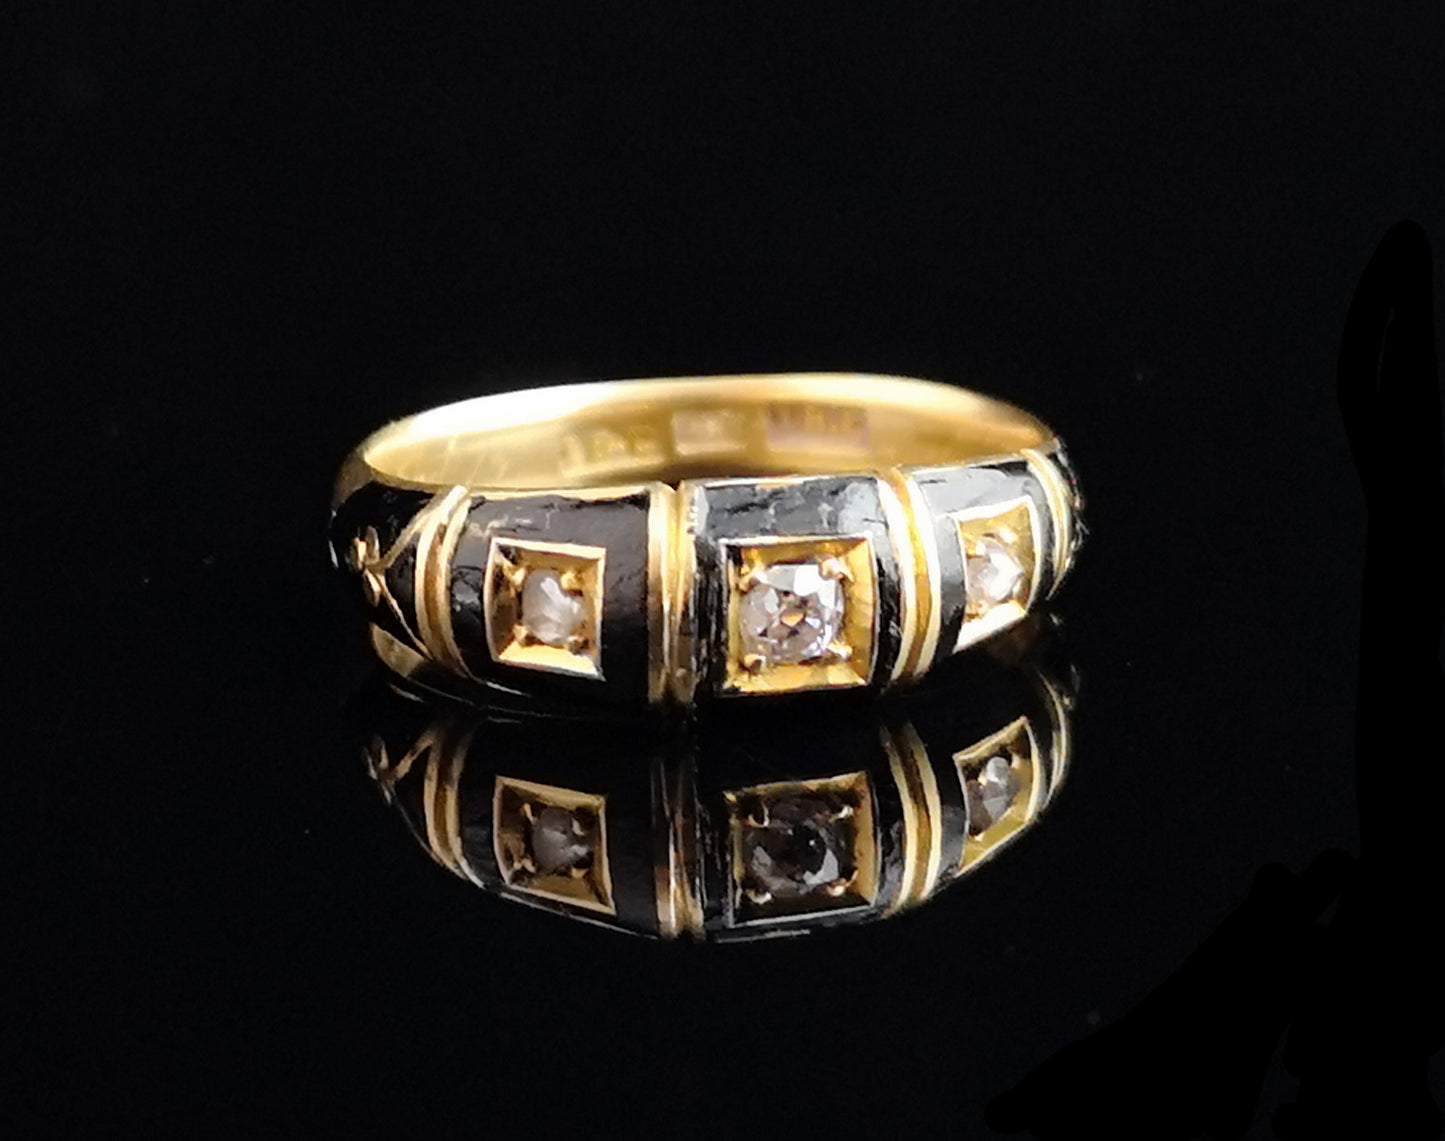 Antique Victorian Diamond mourning ring, 18ct gold and black enamel